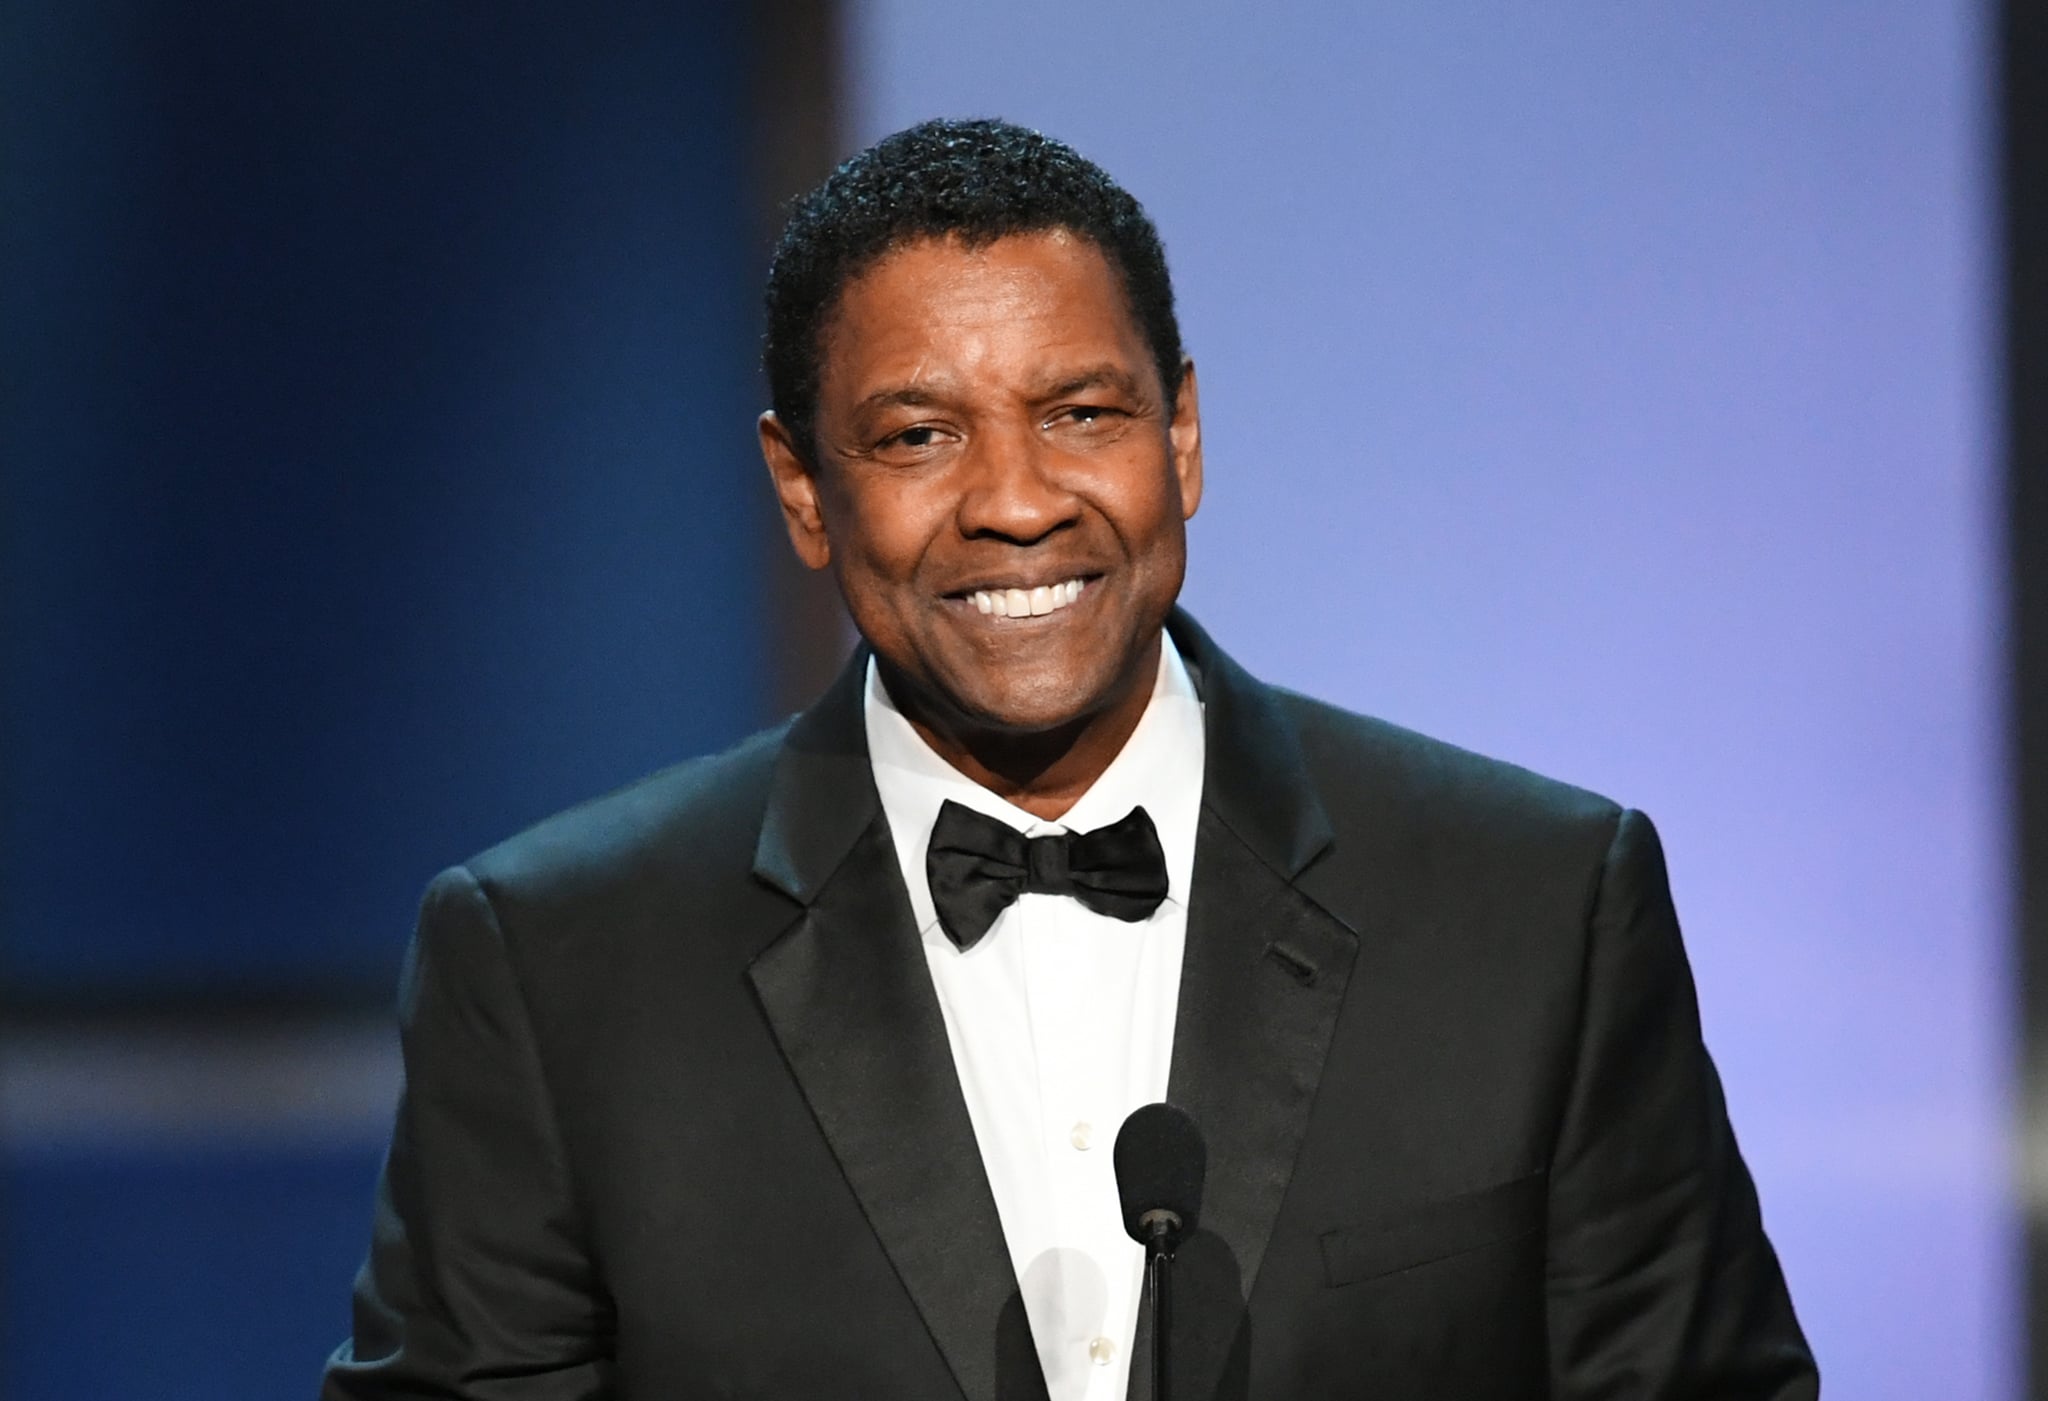 HOLLYWOOD, CALIFORNIA - JUNE 06: Honoree Denzel Washington speaks onstage during the 47th AFI Life Achievement Award honoring Denzel Washington at Dolby Theatre on June 06, 2019 in Hollywood, California. (Photo by Kevin Winter/Getty Images for WarnerMedia) 610265